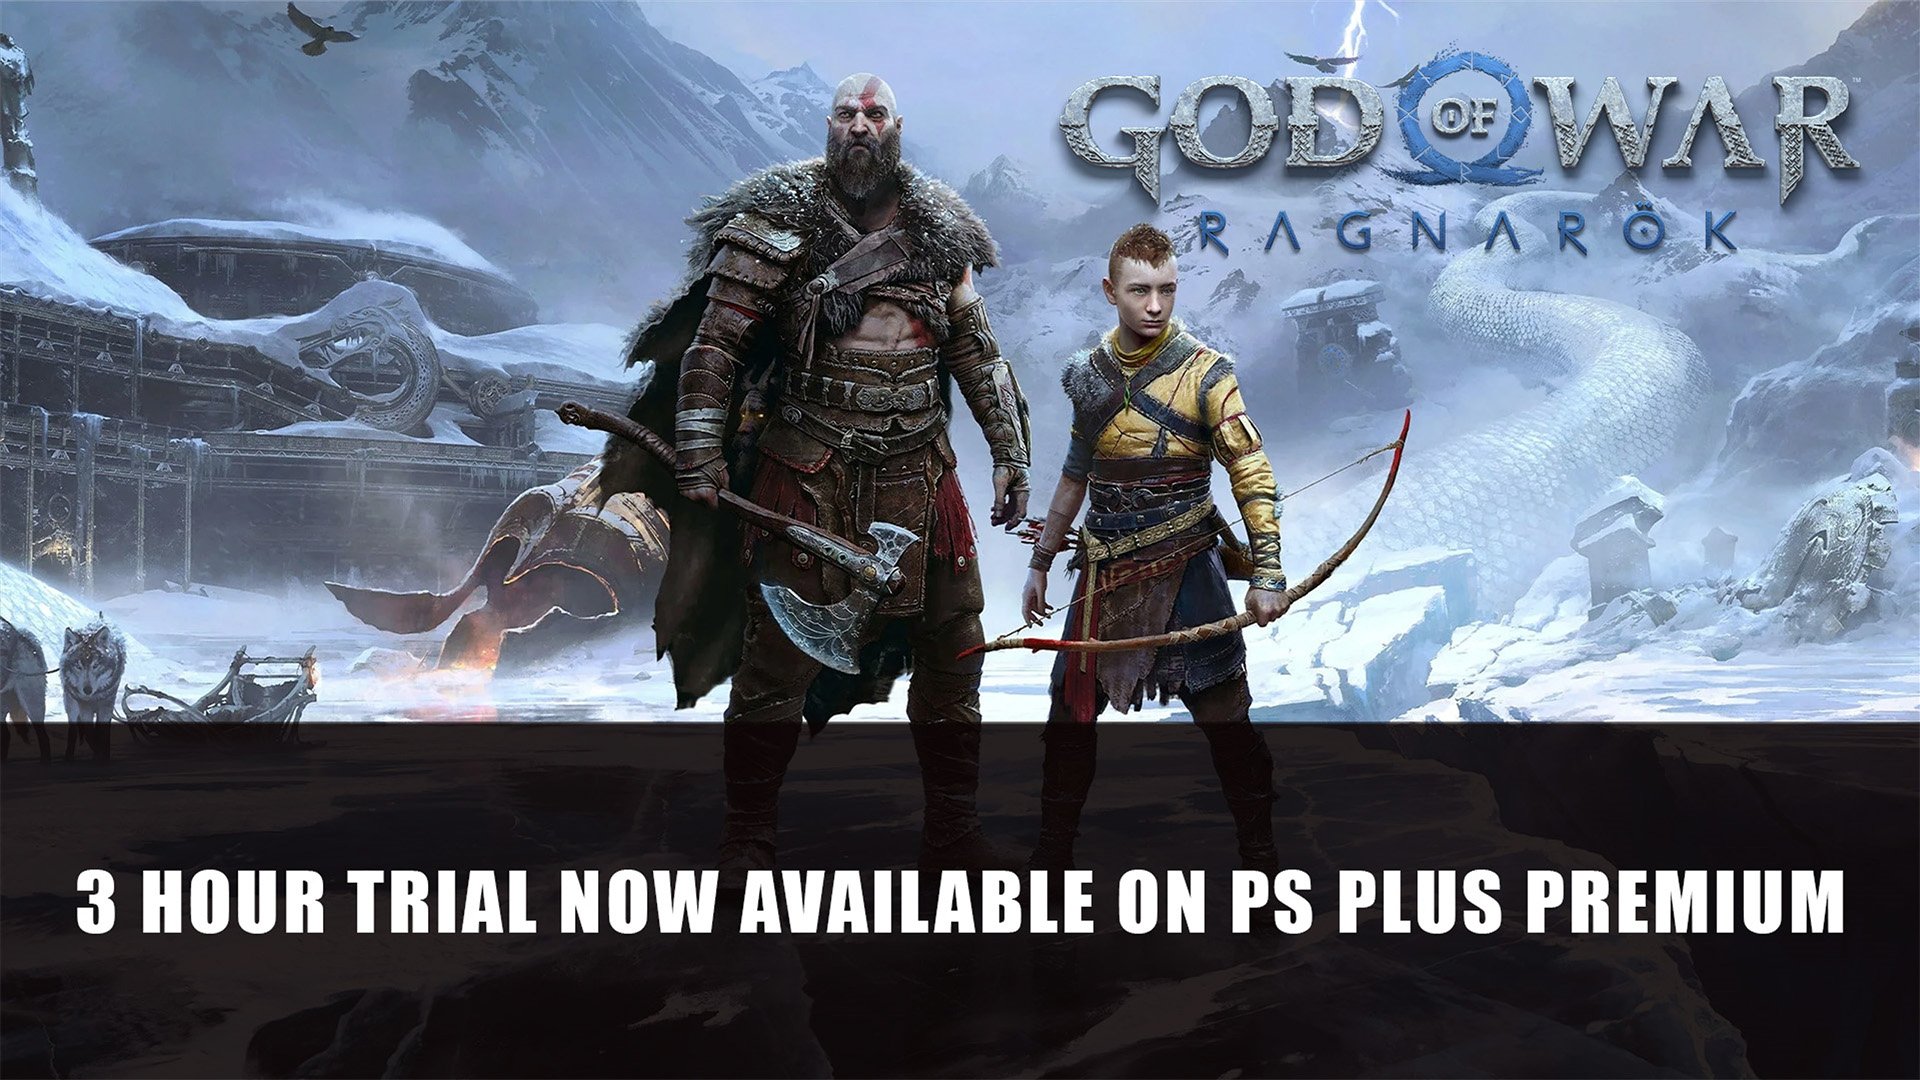 PS Plus Premium Lets You Play God of War Ragnarok in 3 Hour Trial -  Fextralife